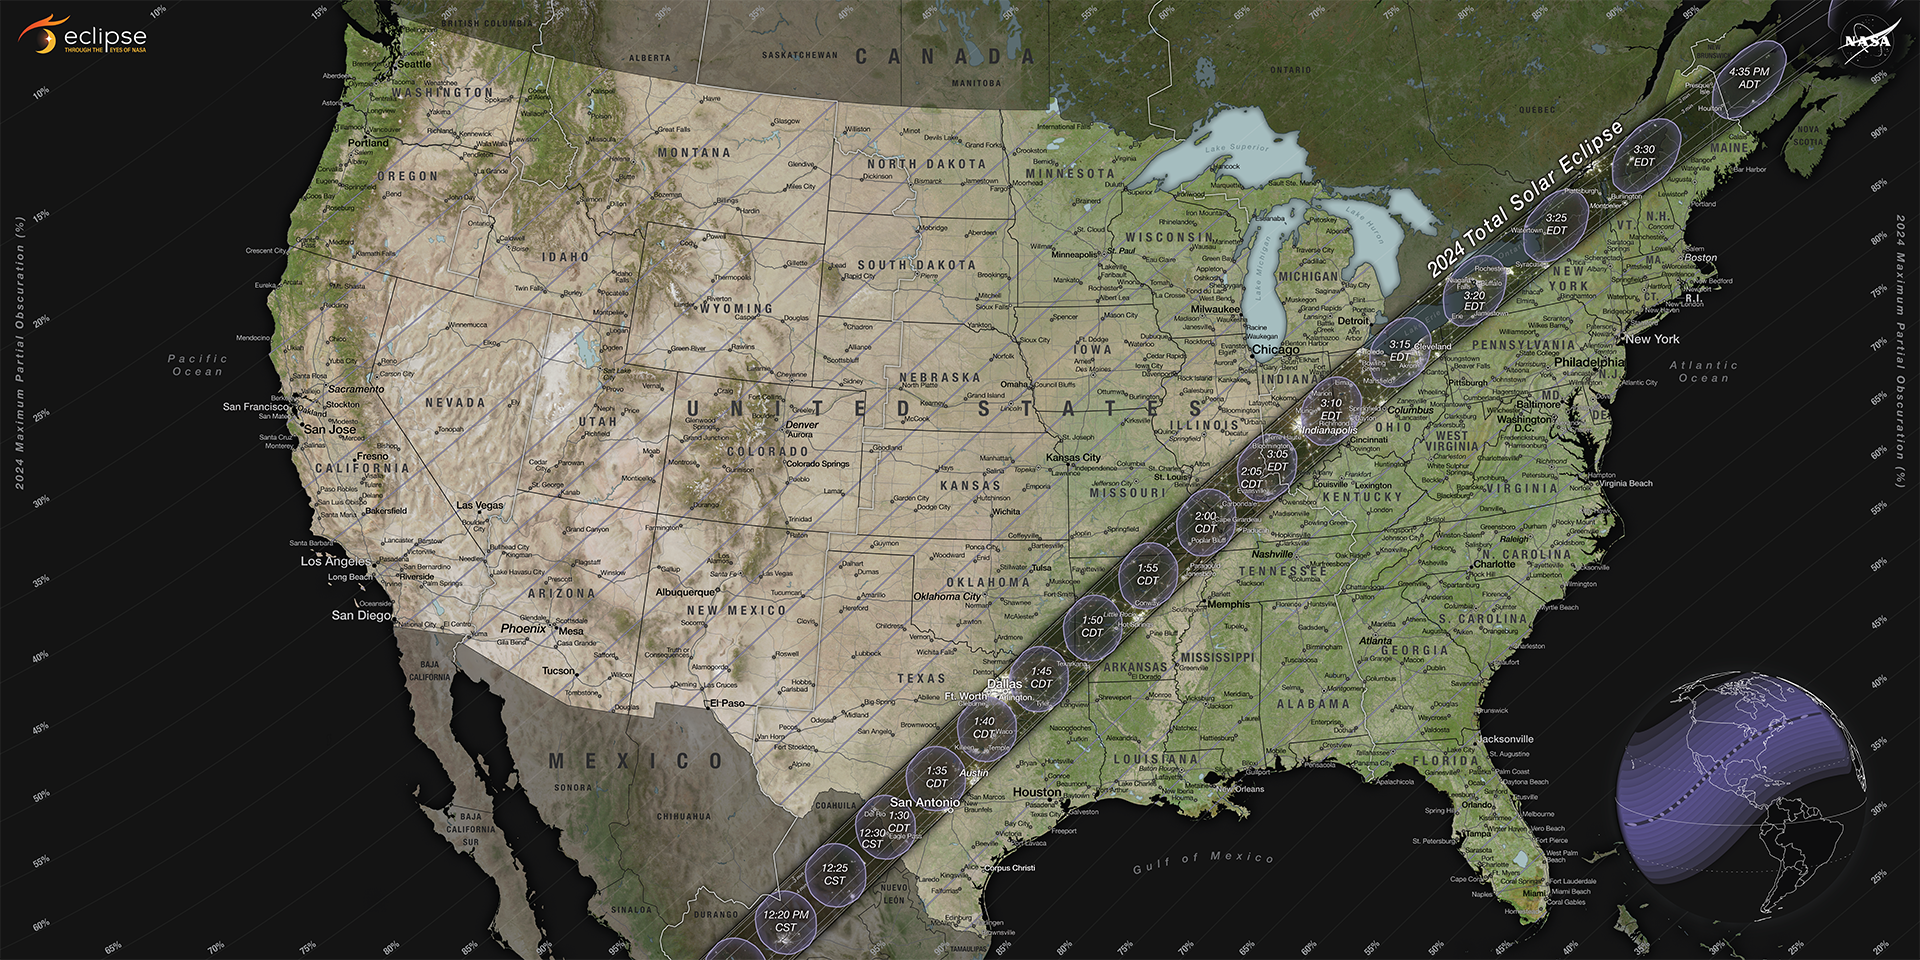 A map of the contiguous U.S. shows the path of the 2024 total solar eclipse stretching on a narrow band from Texas to Maine.